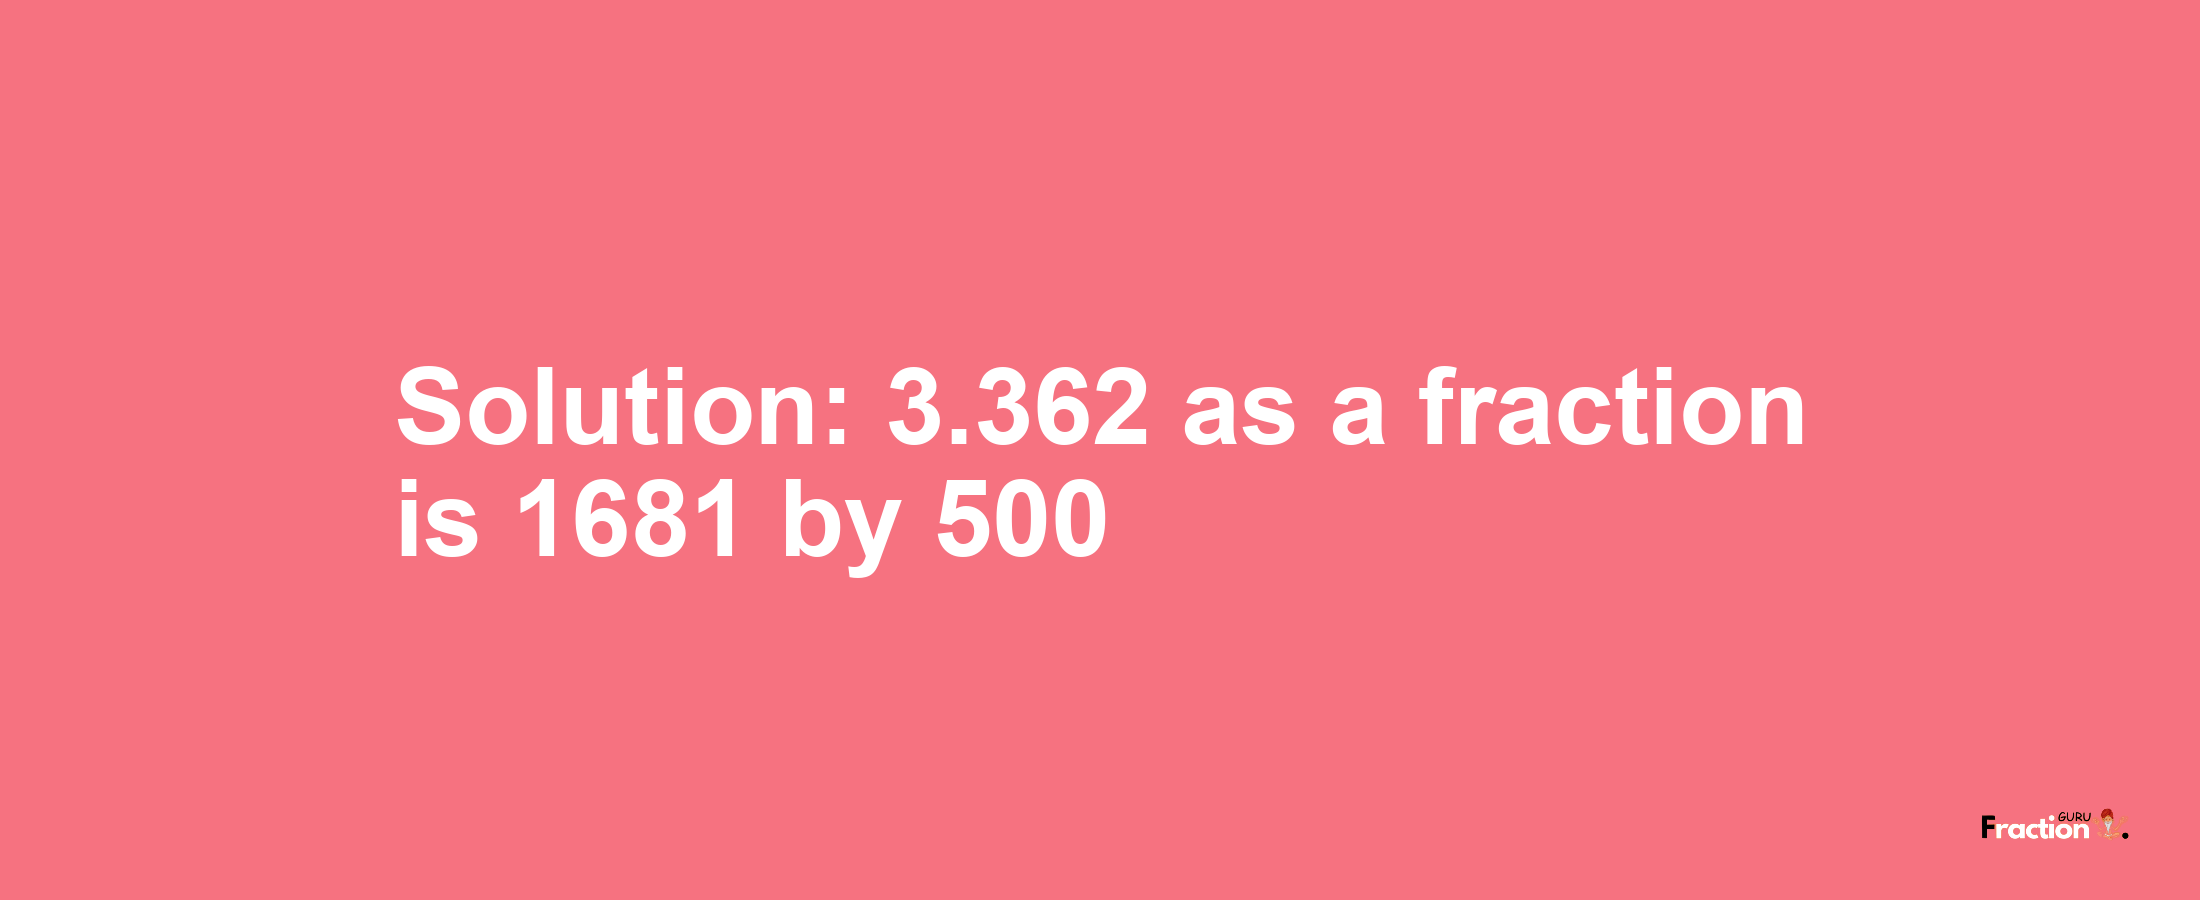 Solution:3.362 as a fraction is 1681/500